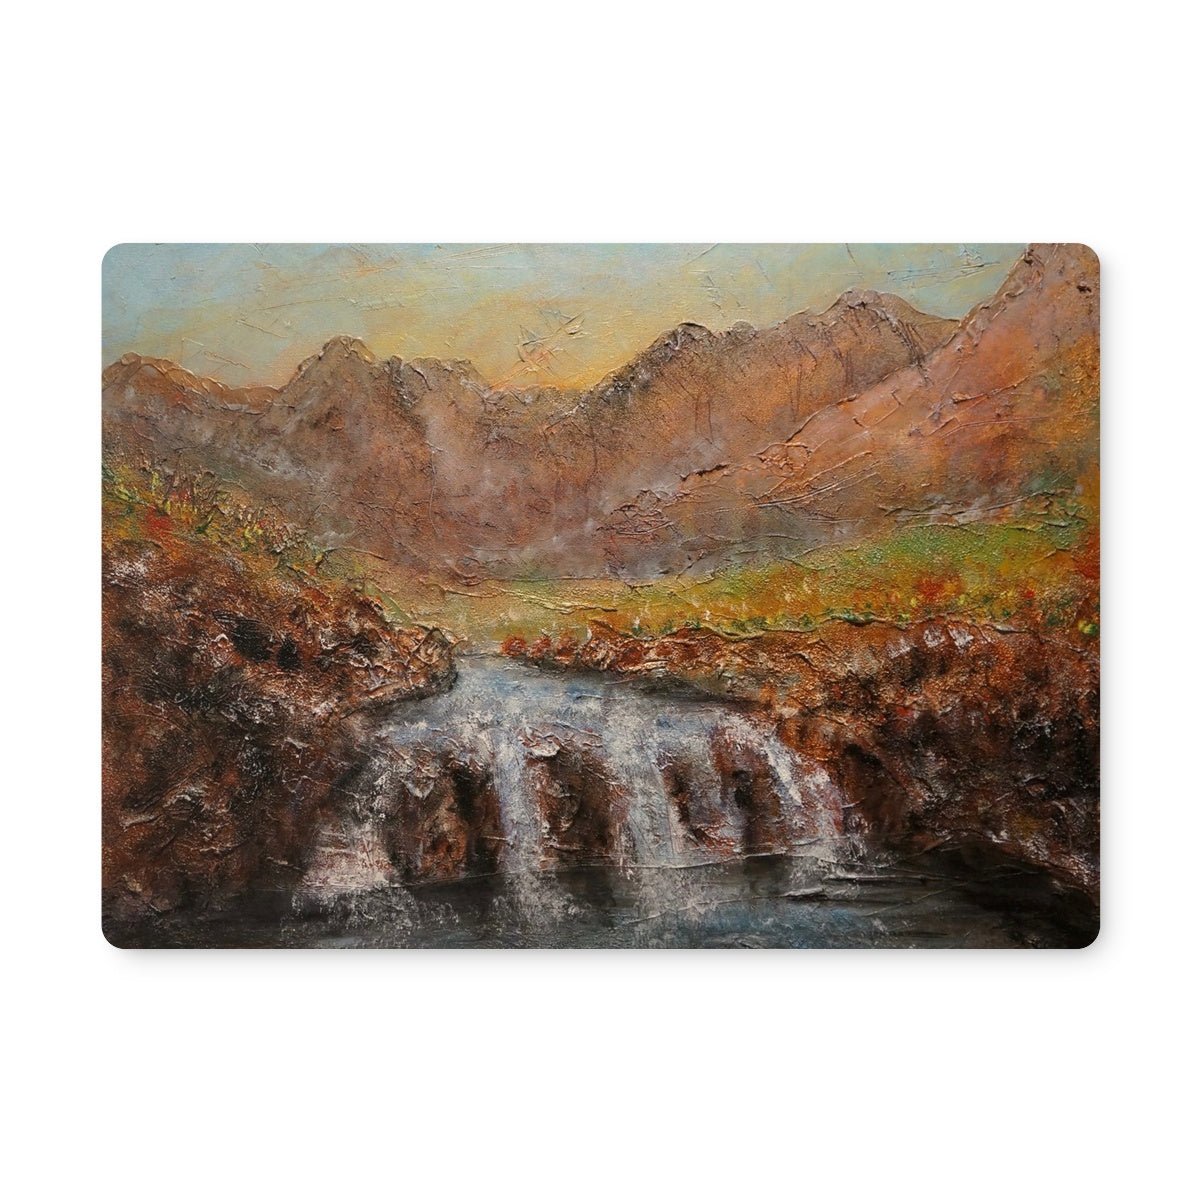 Fairy Pools Dawn Skye Art Gifts Placemat-Placemats-Skye Art Gallery-6 Placemats-Paintings, Prints, Homeware, Art Gifts From Scotland By Scottish Artist Kevin Hunter